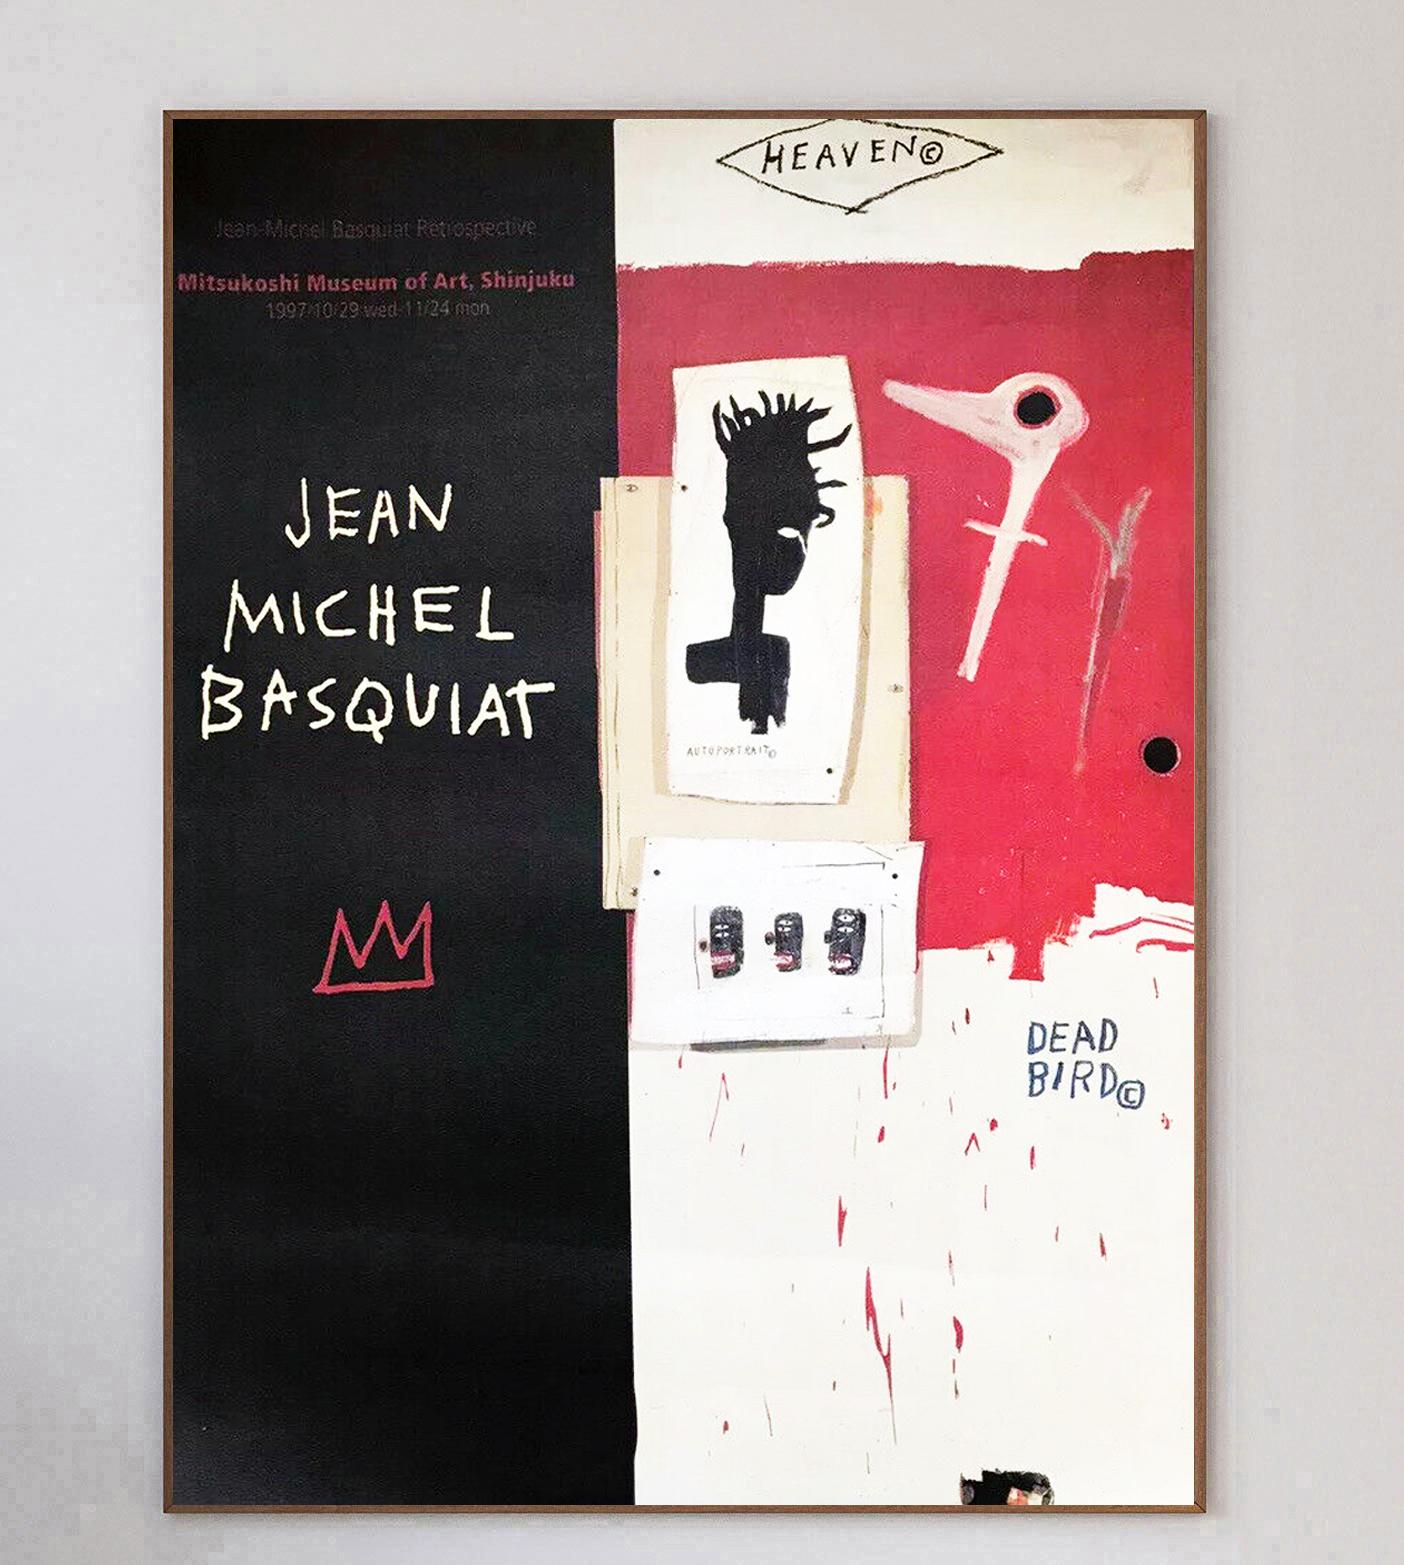 One of the most influential artists of the 20th century, Jean-Michel Basquiat rose to prominence in the 1970s and early 1980s. Achieving so much in such a short space of time, his neo-expressionist artworks were social commentary using painting,